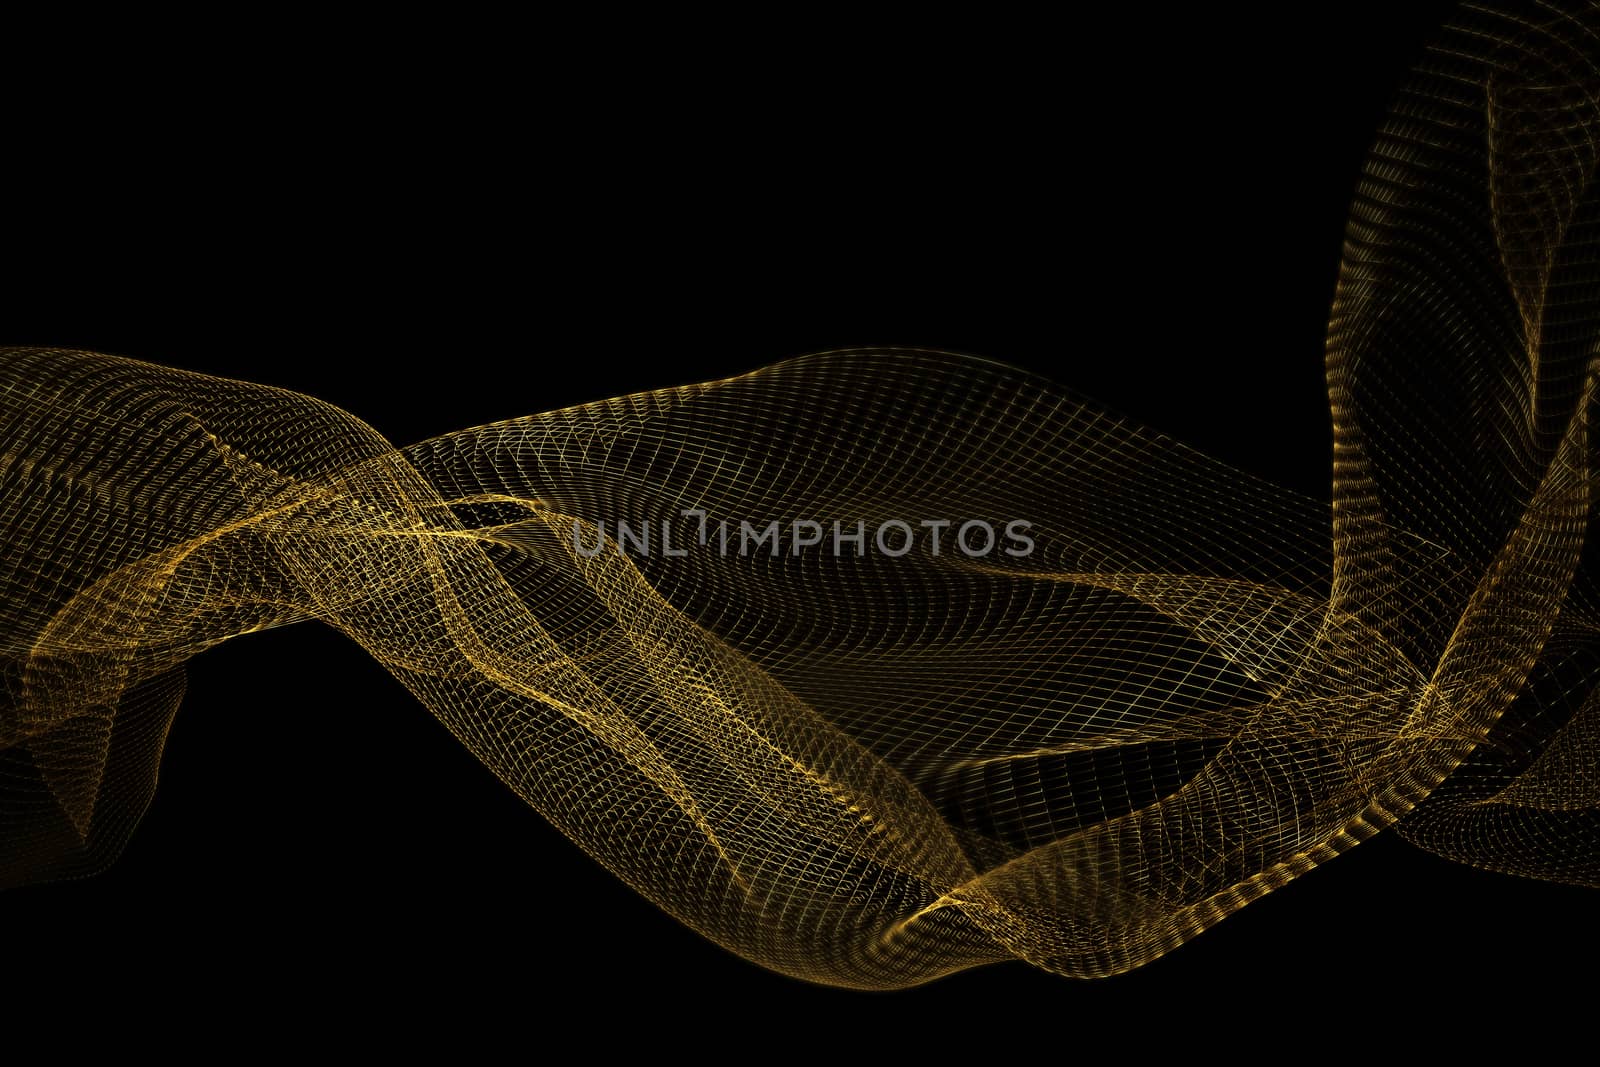 Wireframe fabric on black background 3D render